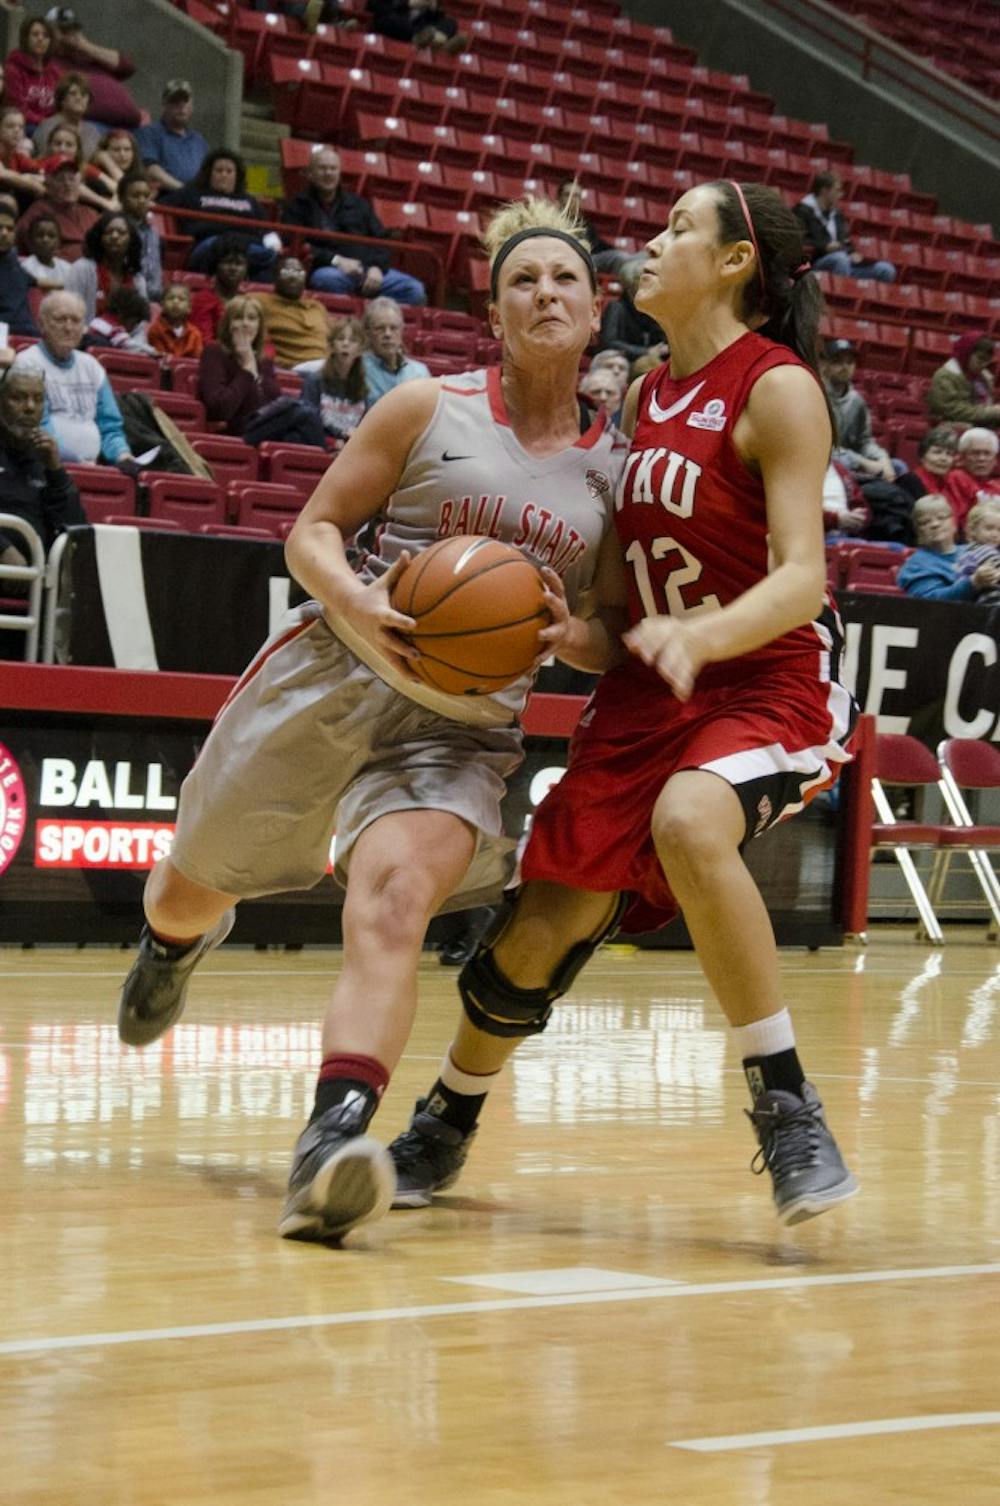 Freshman guard Jill Morrison takes the ball for a layup past Western Kentucky's Kendall Noble in the first half Dec. 7 at Worthen Arena. Morrison had 26 points in the game. DN PHOTO BREANNA DAUGHERTY